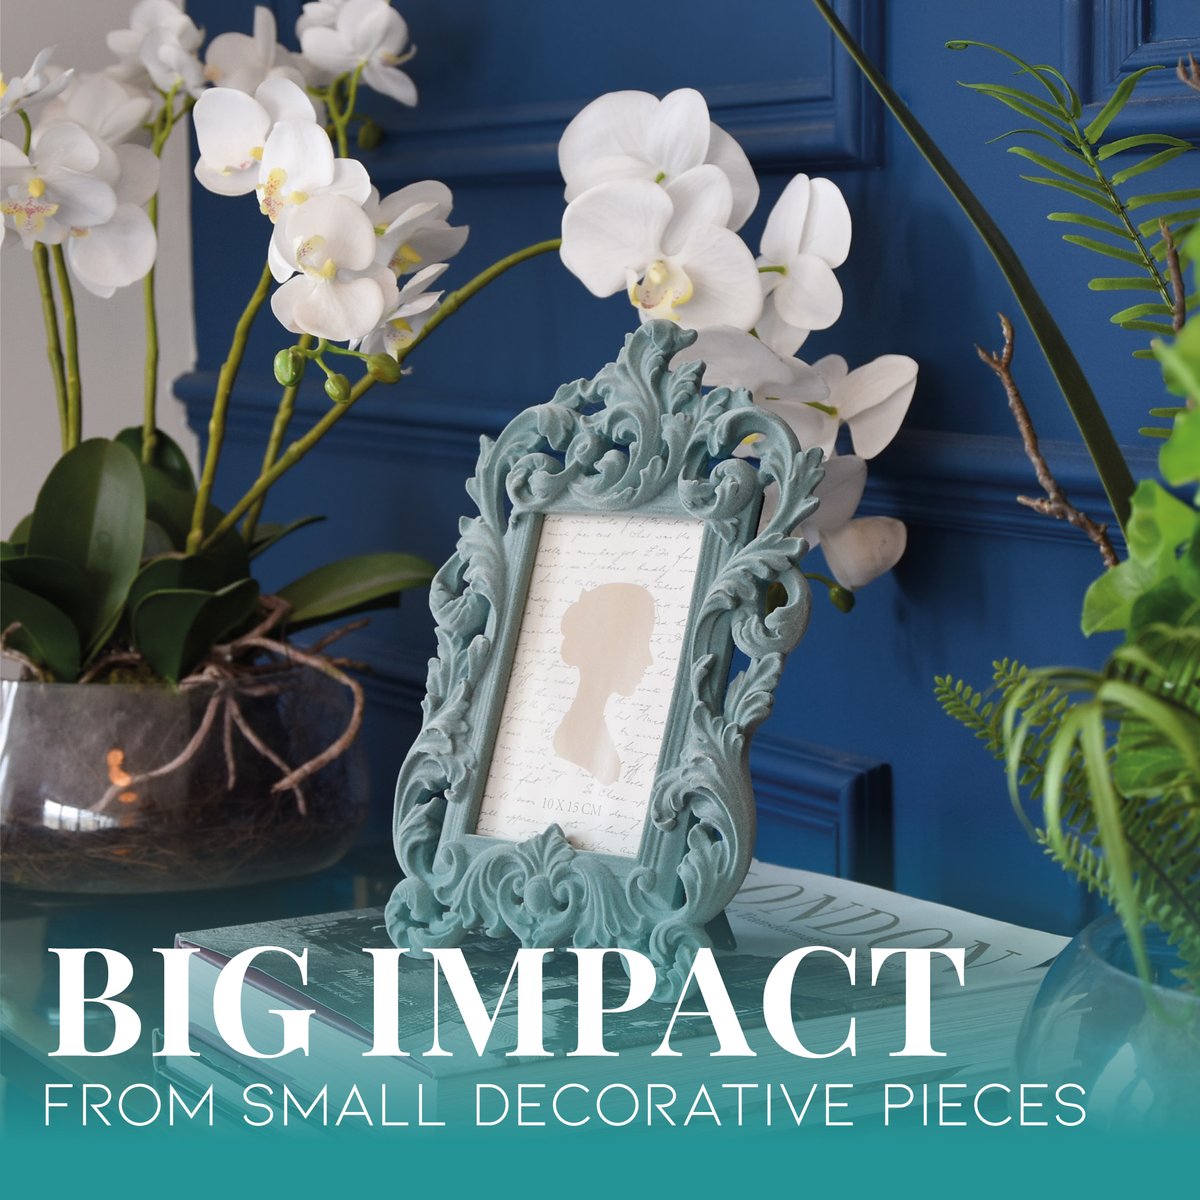 Make memories and display them in your home🖼️

Our ornate flocked blue photo frame embodies creative, stylish flair, perfect for a home looking for small decorative pieces.

Visit our website today📲

#MyMAndMHome #PhotoFrames #FrameYourMemories